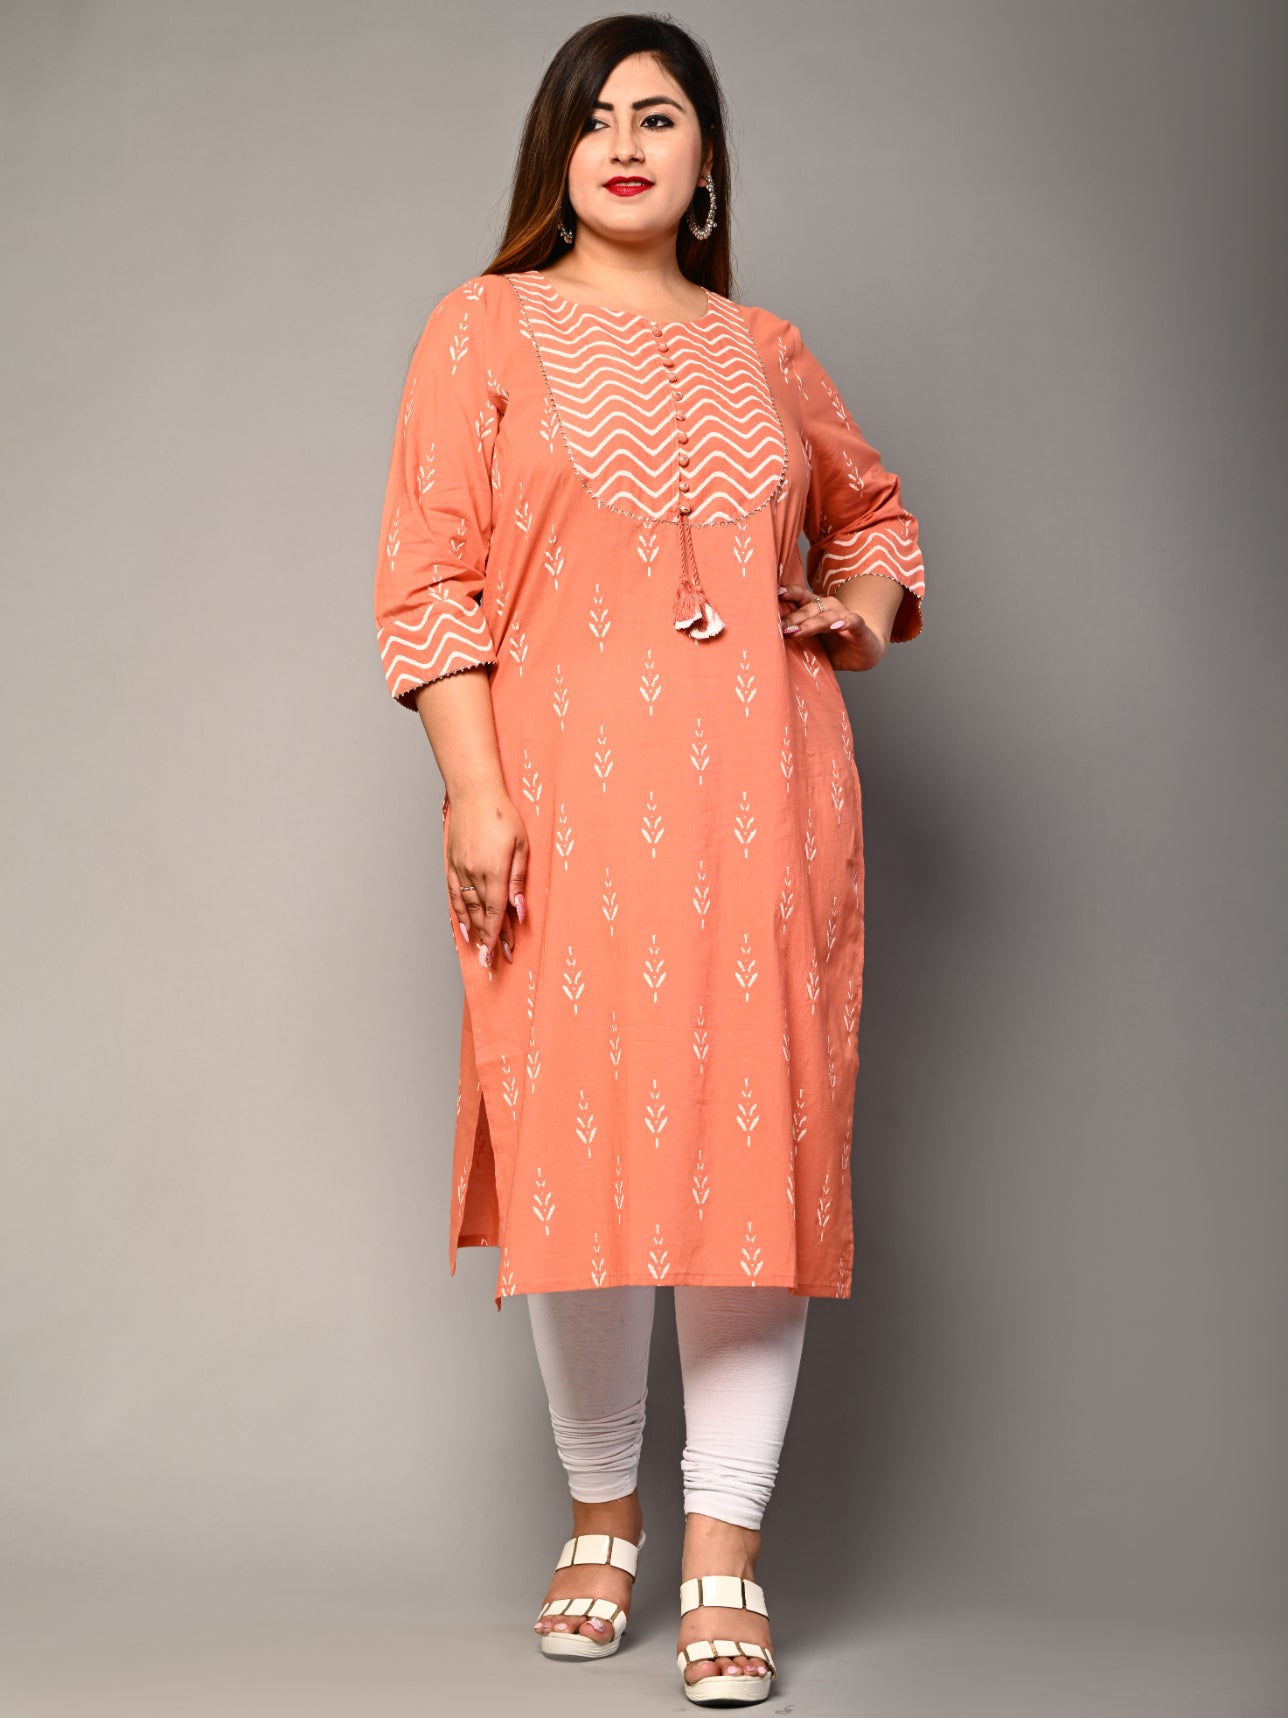 Buy Plus Size Kurtis For Women Online at Best Price - Apella – Page 3